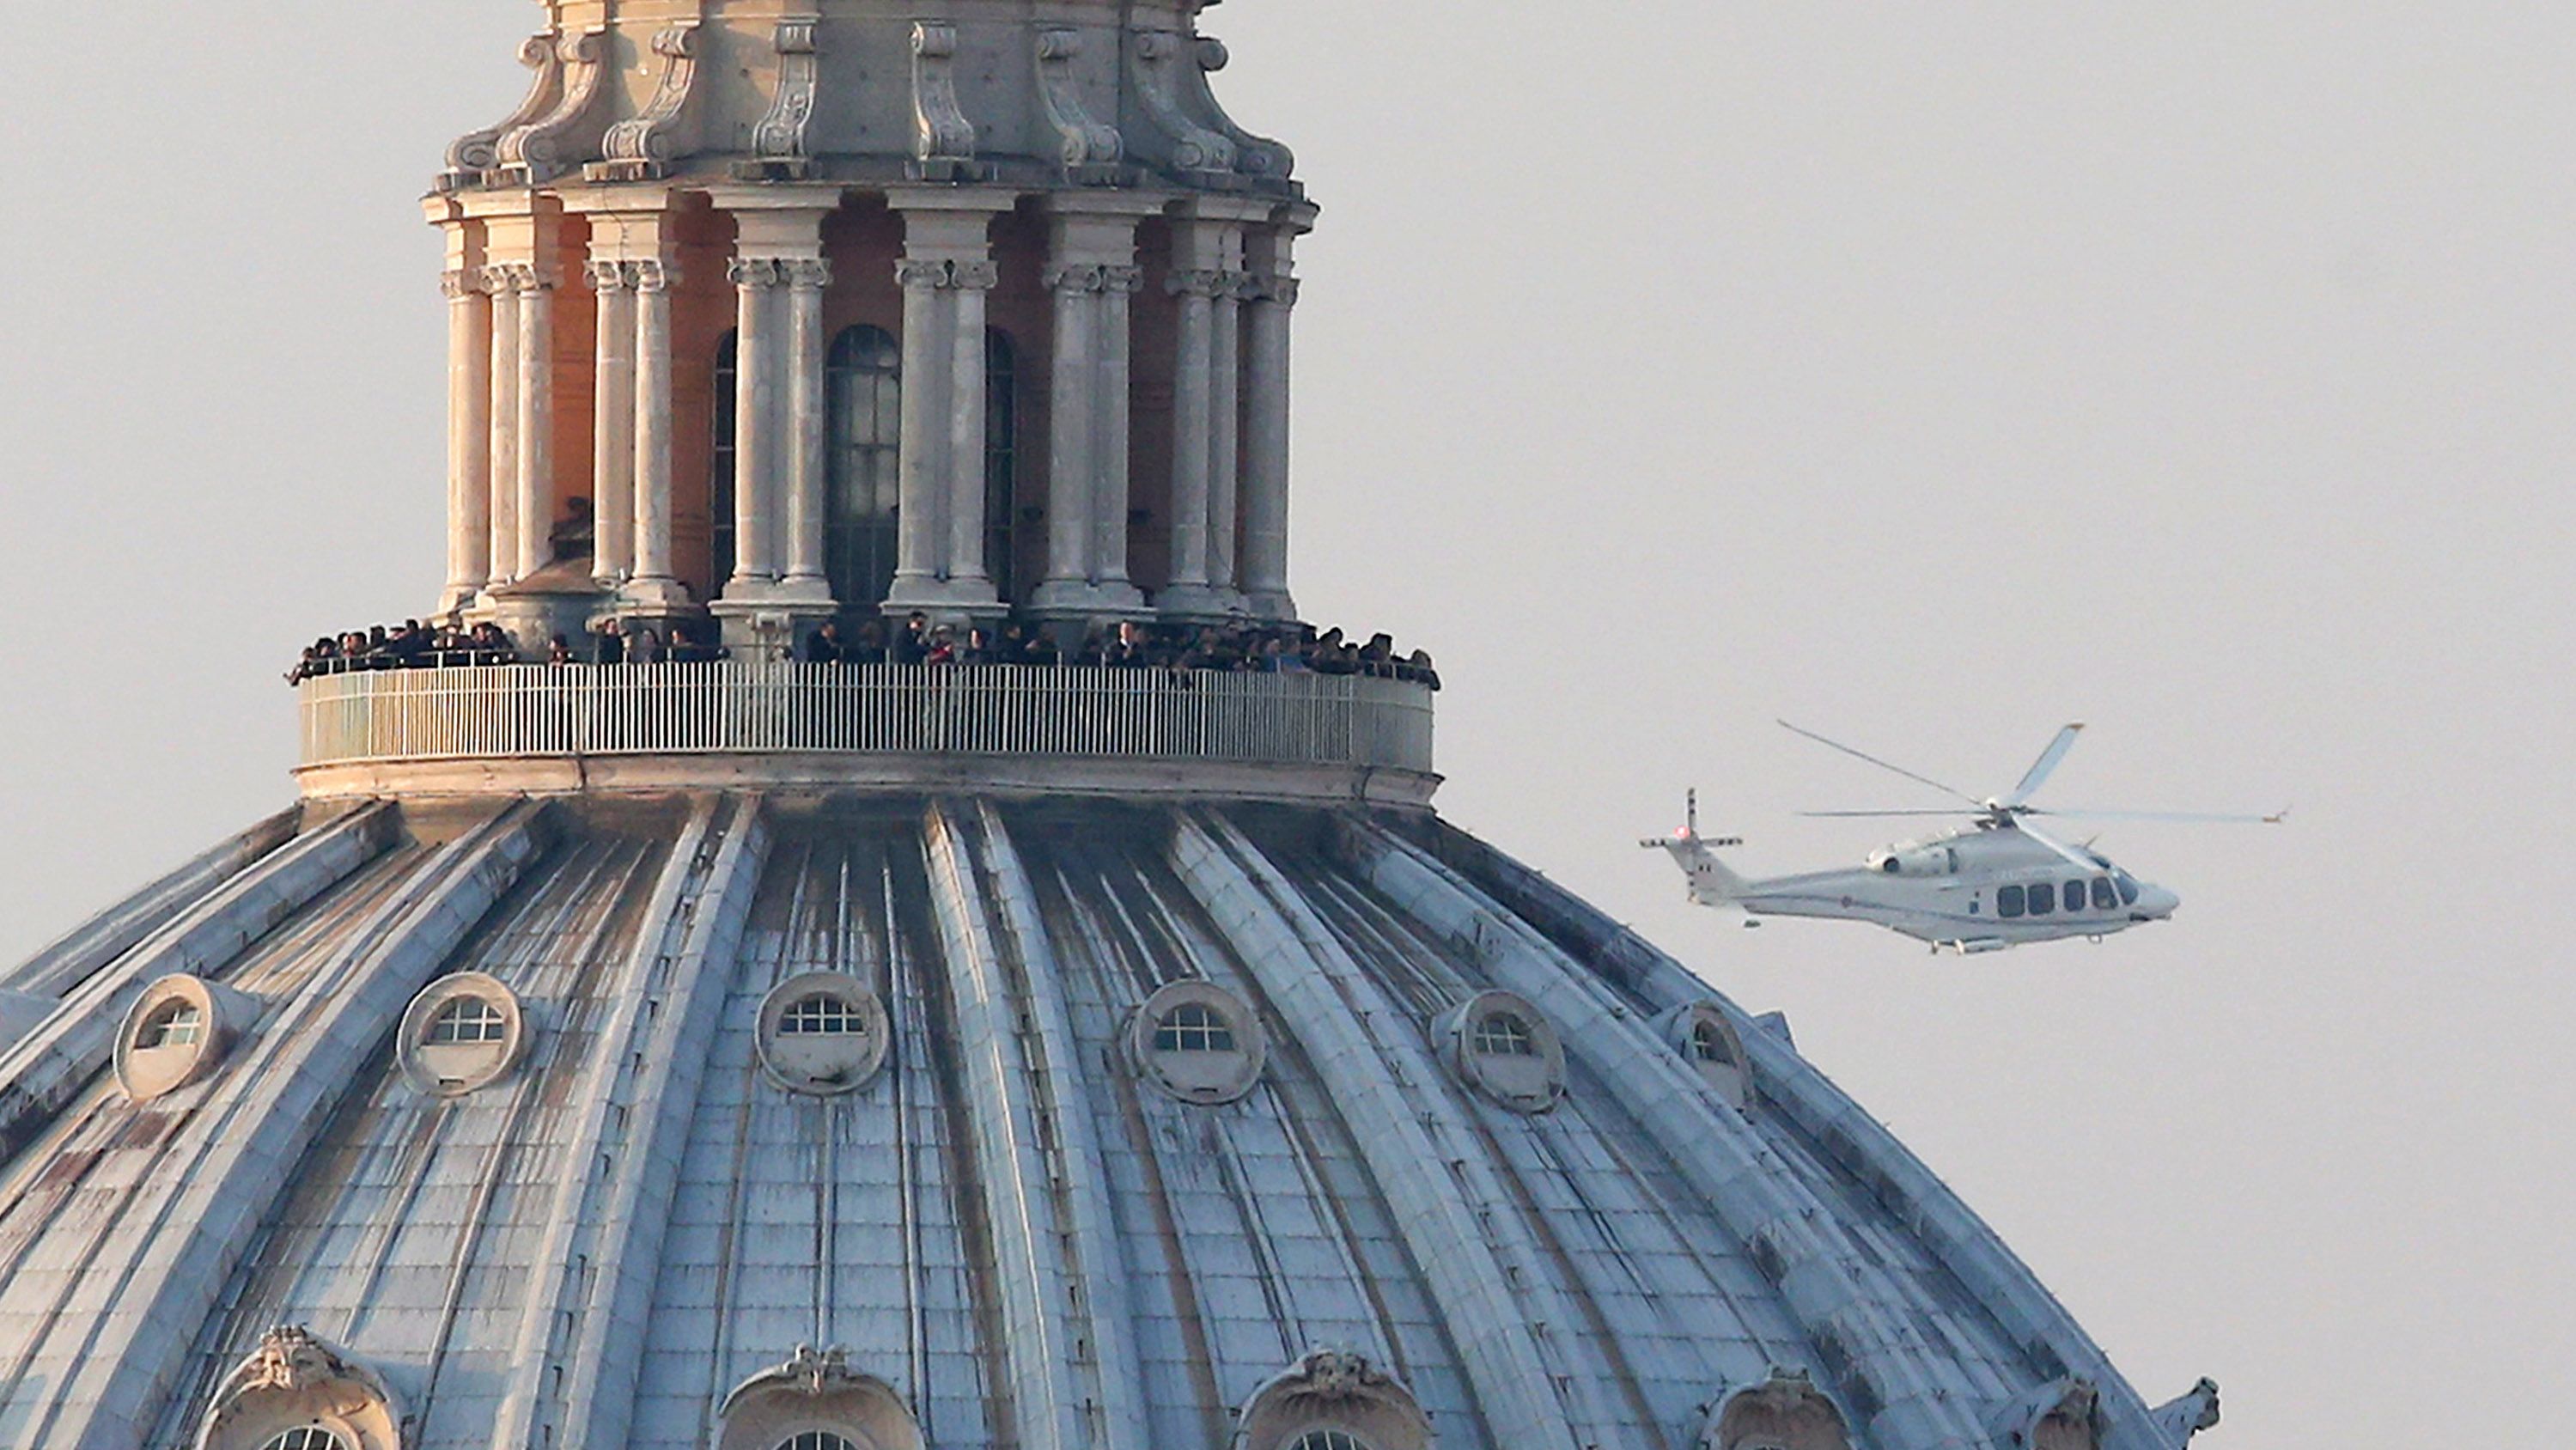 People crowd the gallery on top of St. Peter's Basilica as a helicopter carries Benedict out of Vatican City in February 2013. He was heading to Castel Gandolfo, where he would stay until the next pope was chosen.